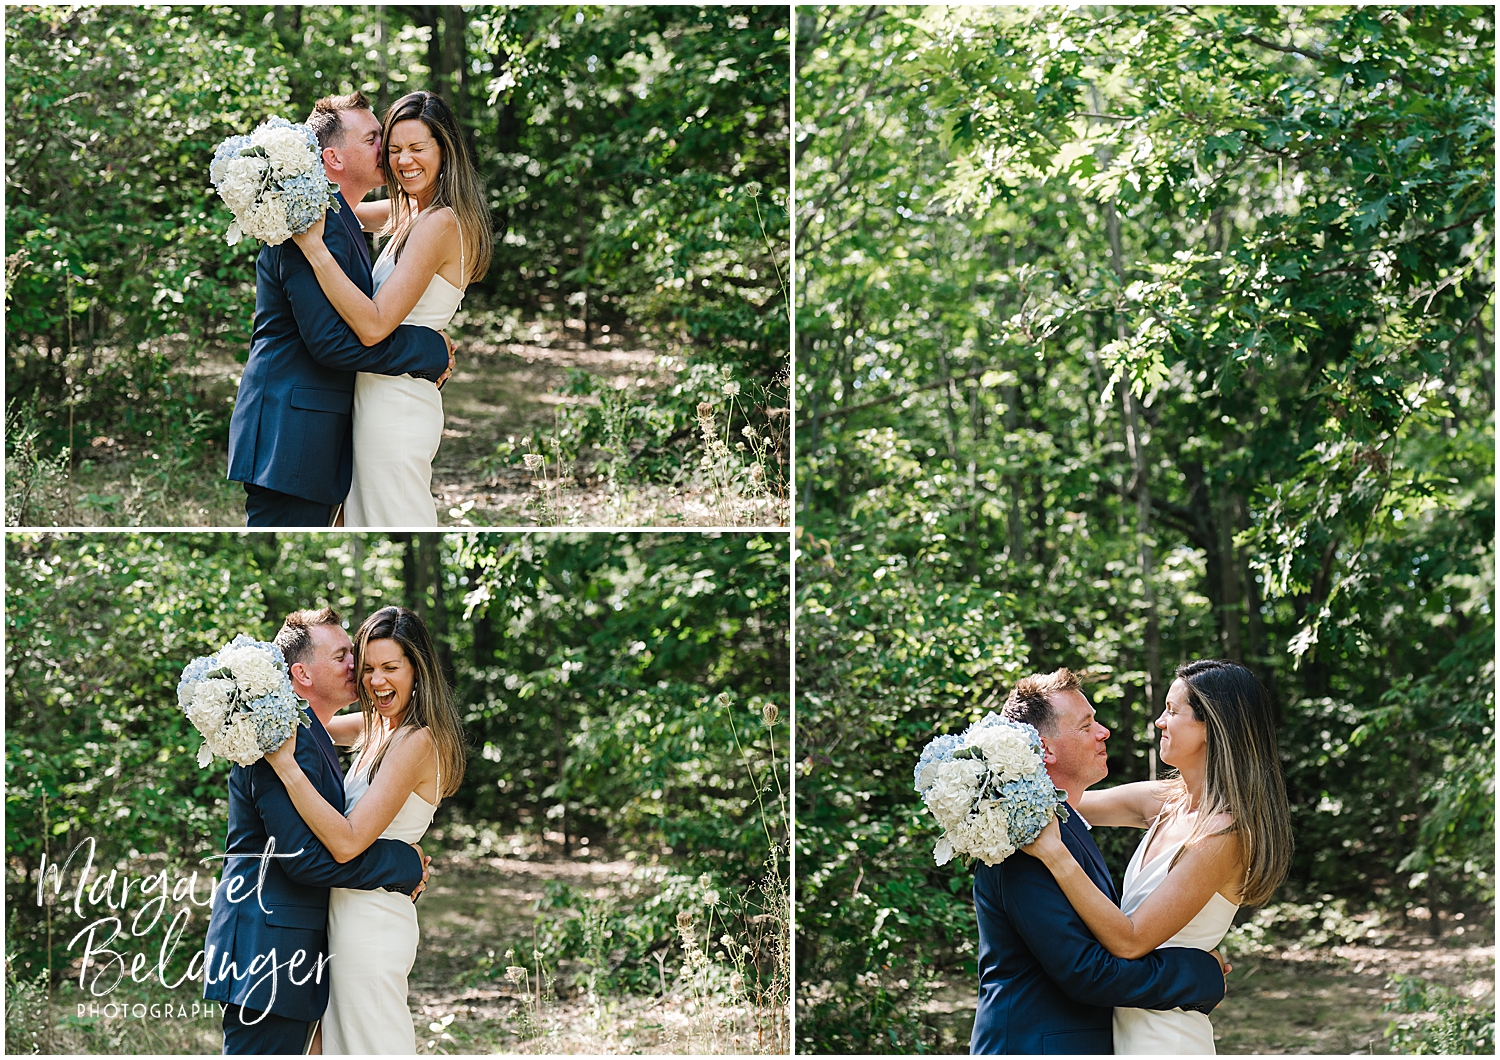 A wedding couple joyfully embracing and kissing in a sunny woodland setting.